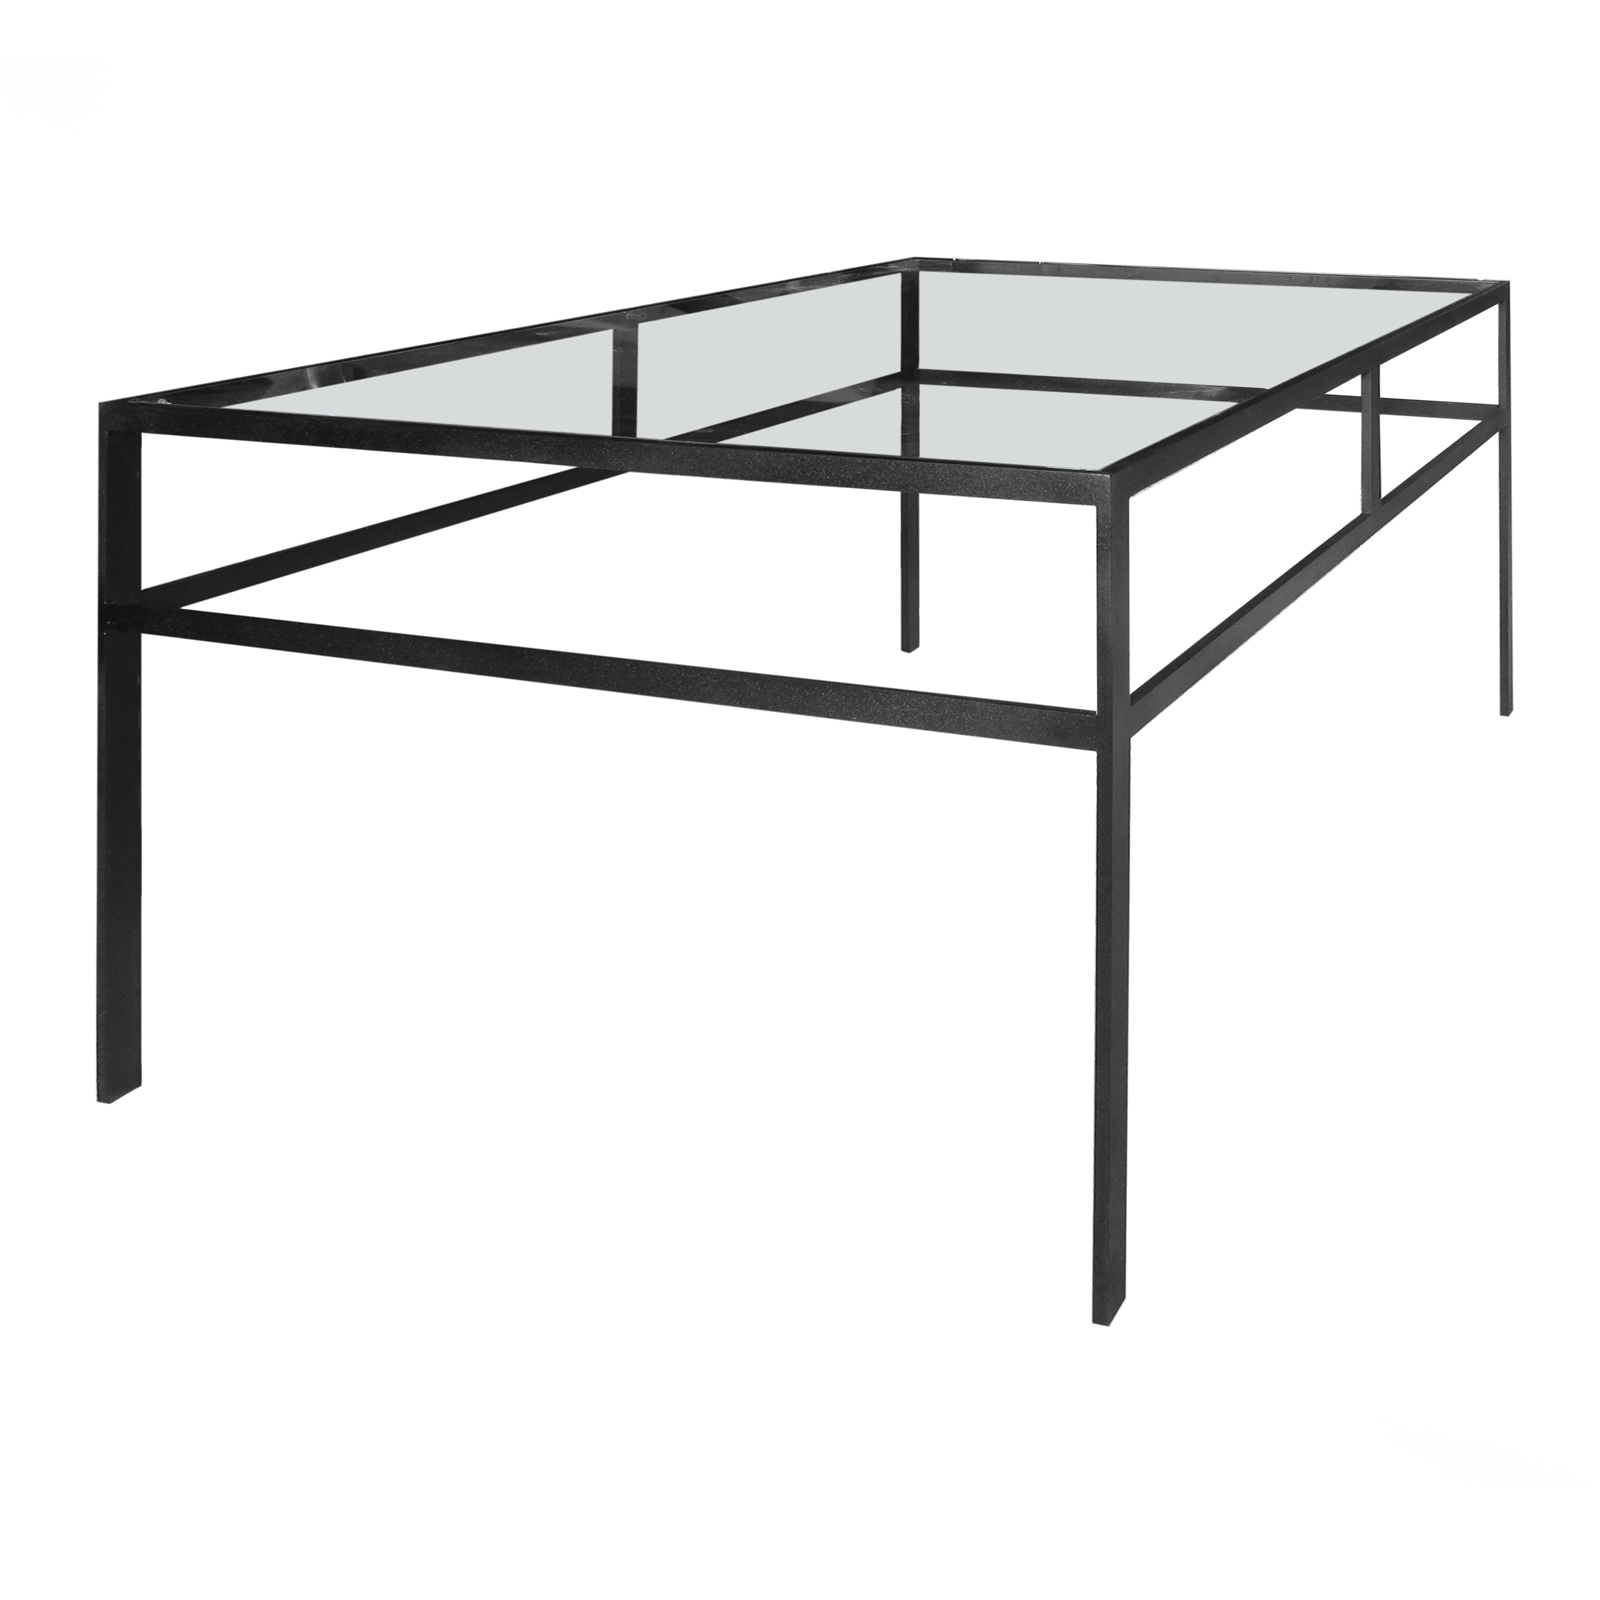 Deben metal coffee table. Made to order by Perceval Designs